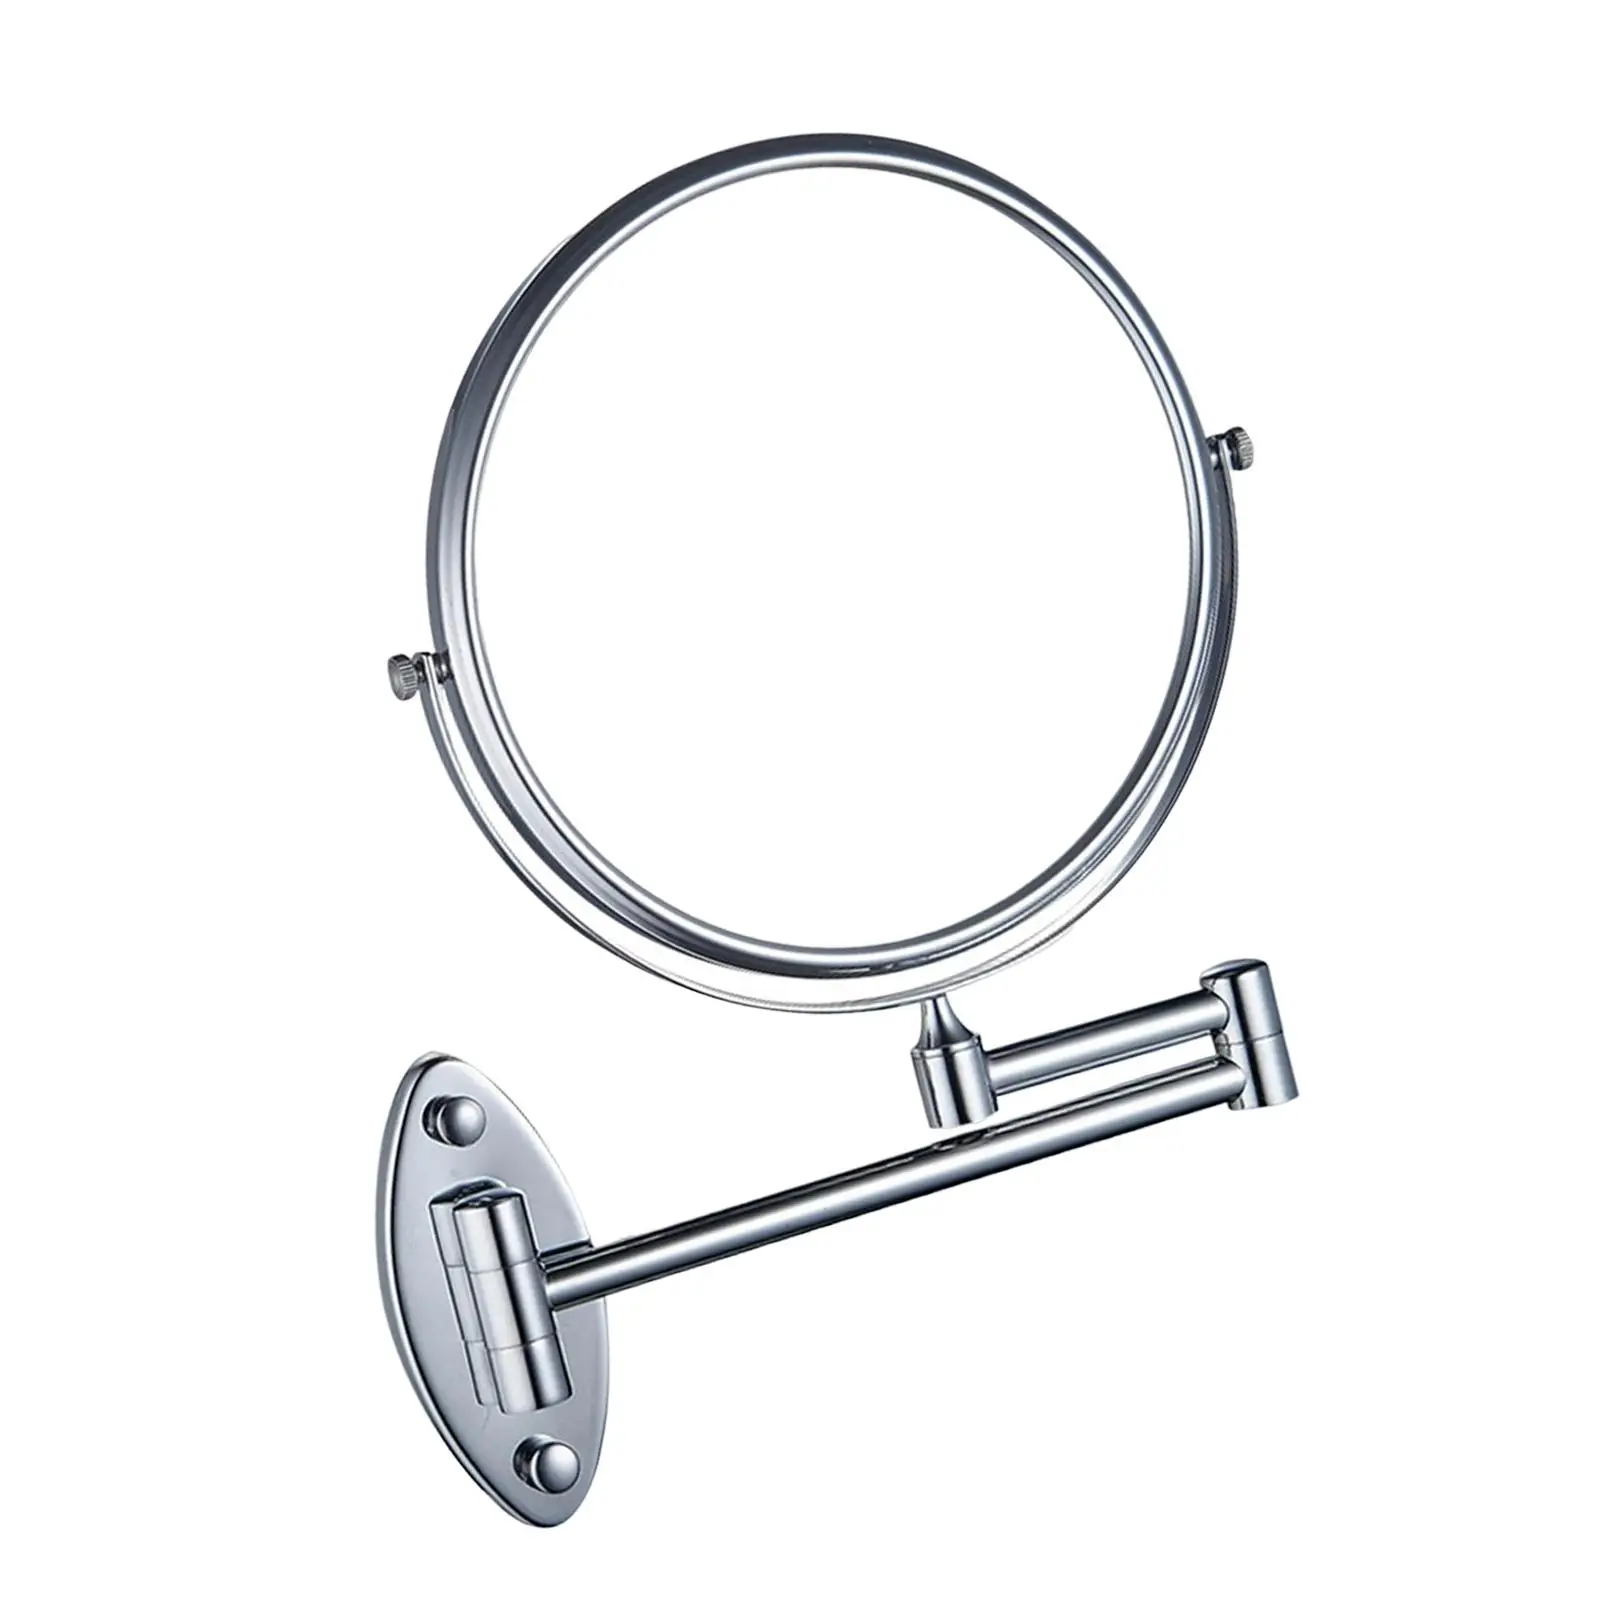 8 Inch Wall Mounted Makeup Mirror, Double Sided Anti-fog for Bathroom, Hotel